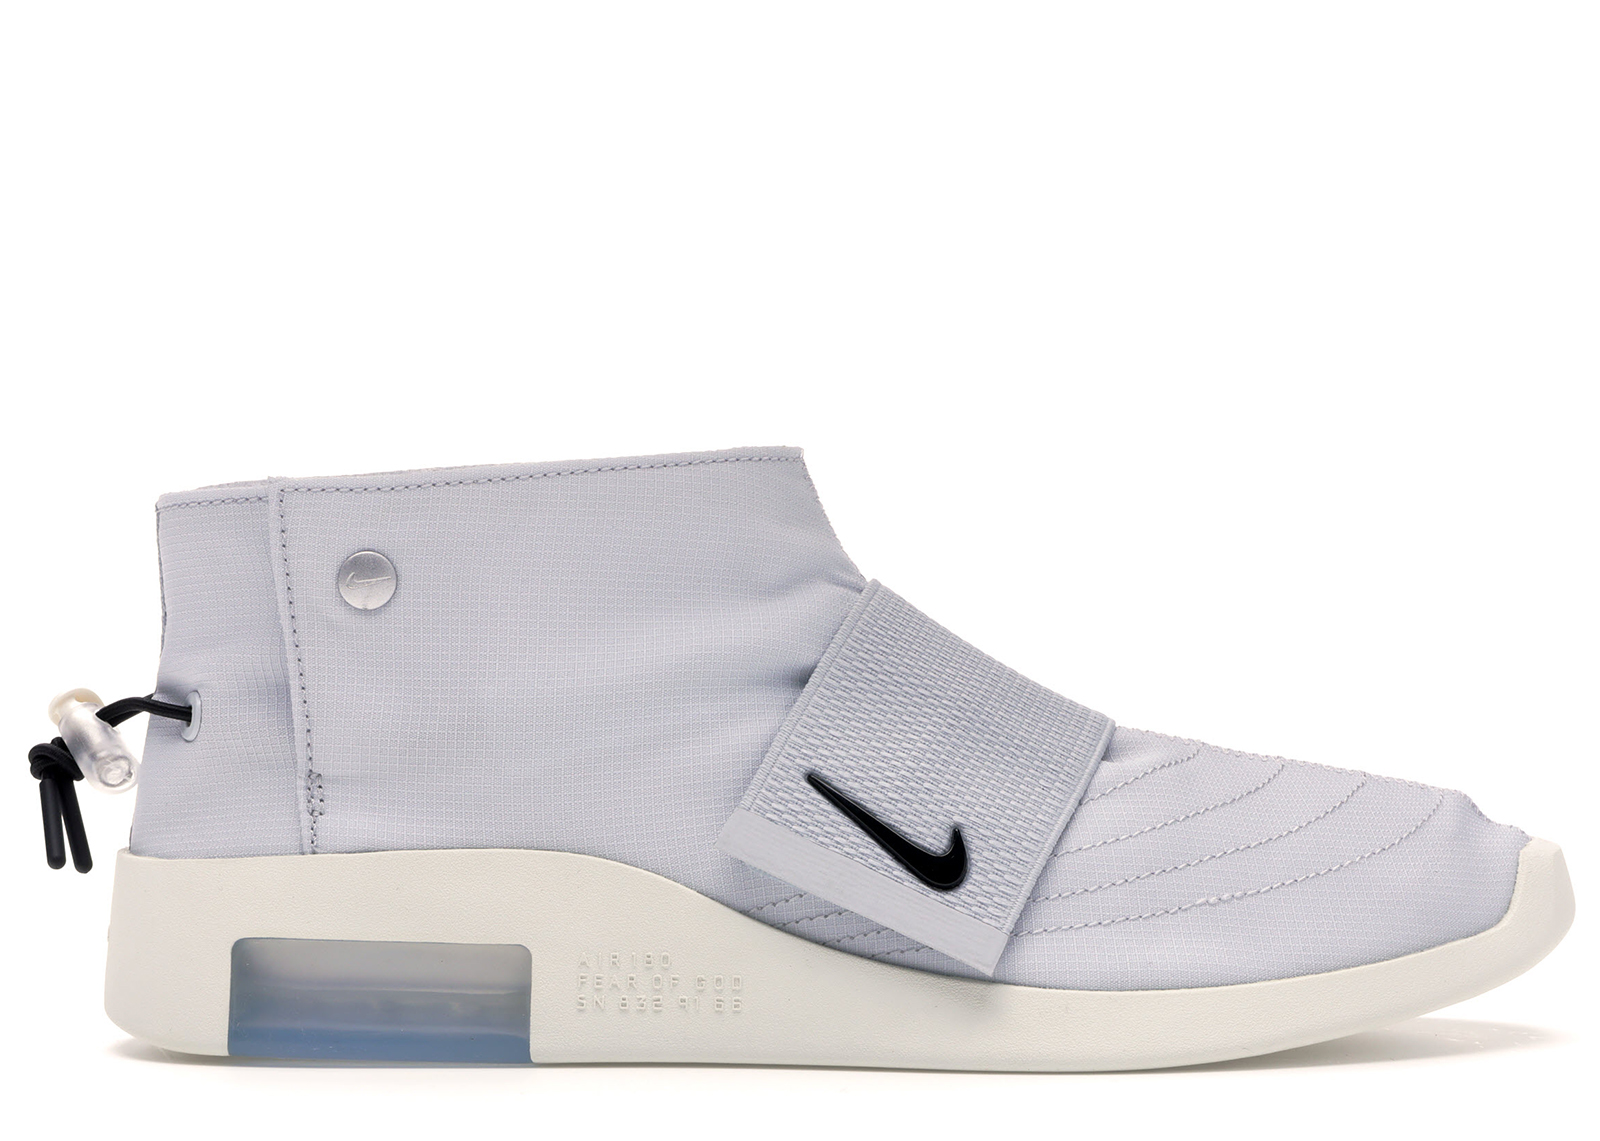 Buy Nike Fear Of God Shoes & New Sneakers - StockX